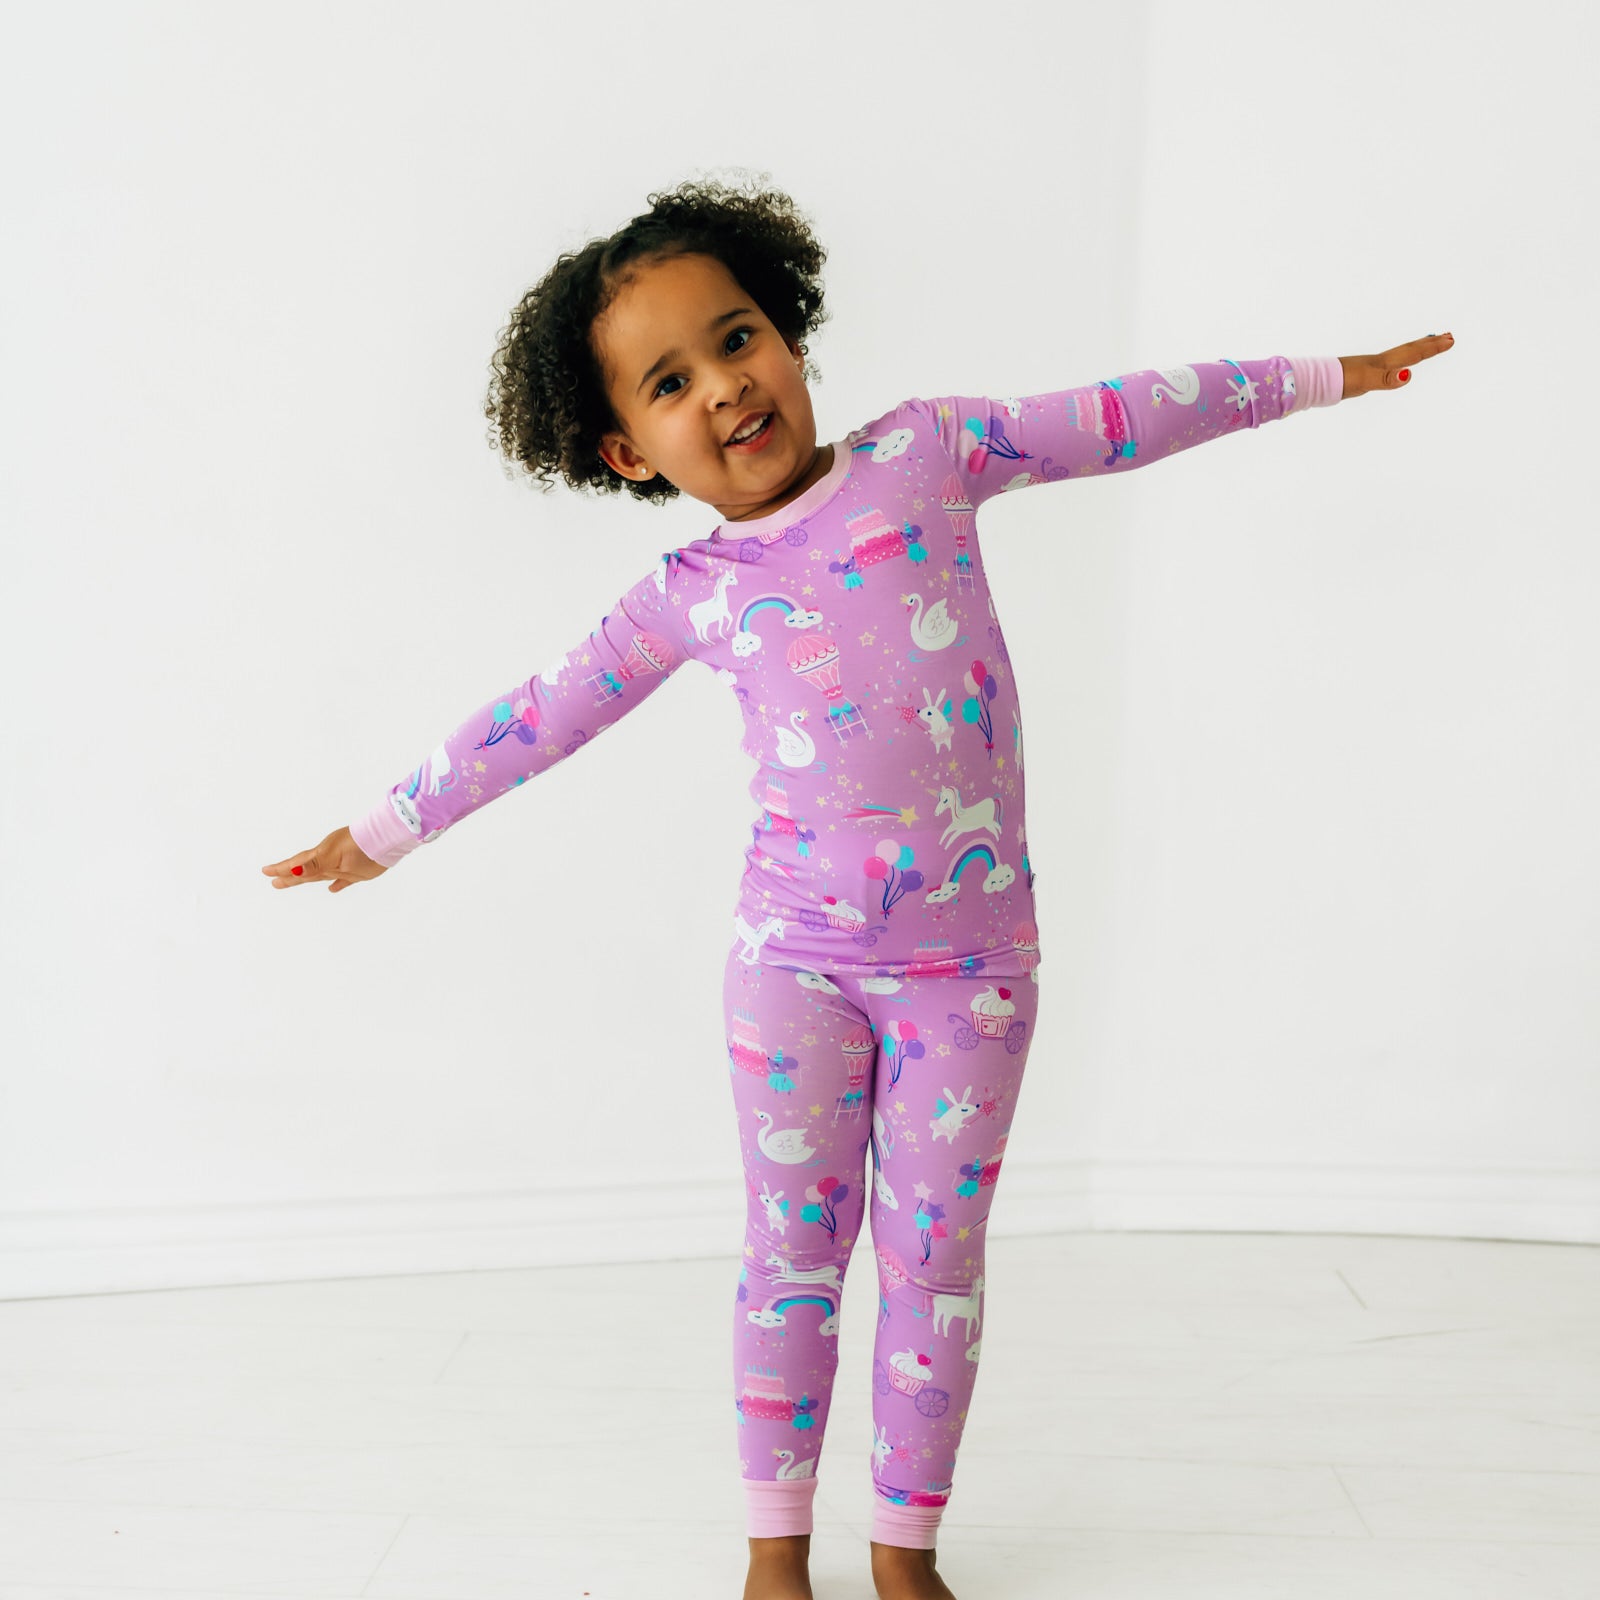 Alternate image of a child playing wearing a Magical Birthday two piece pj set